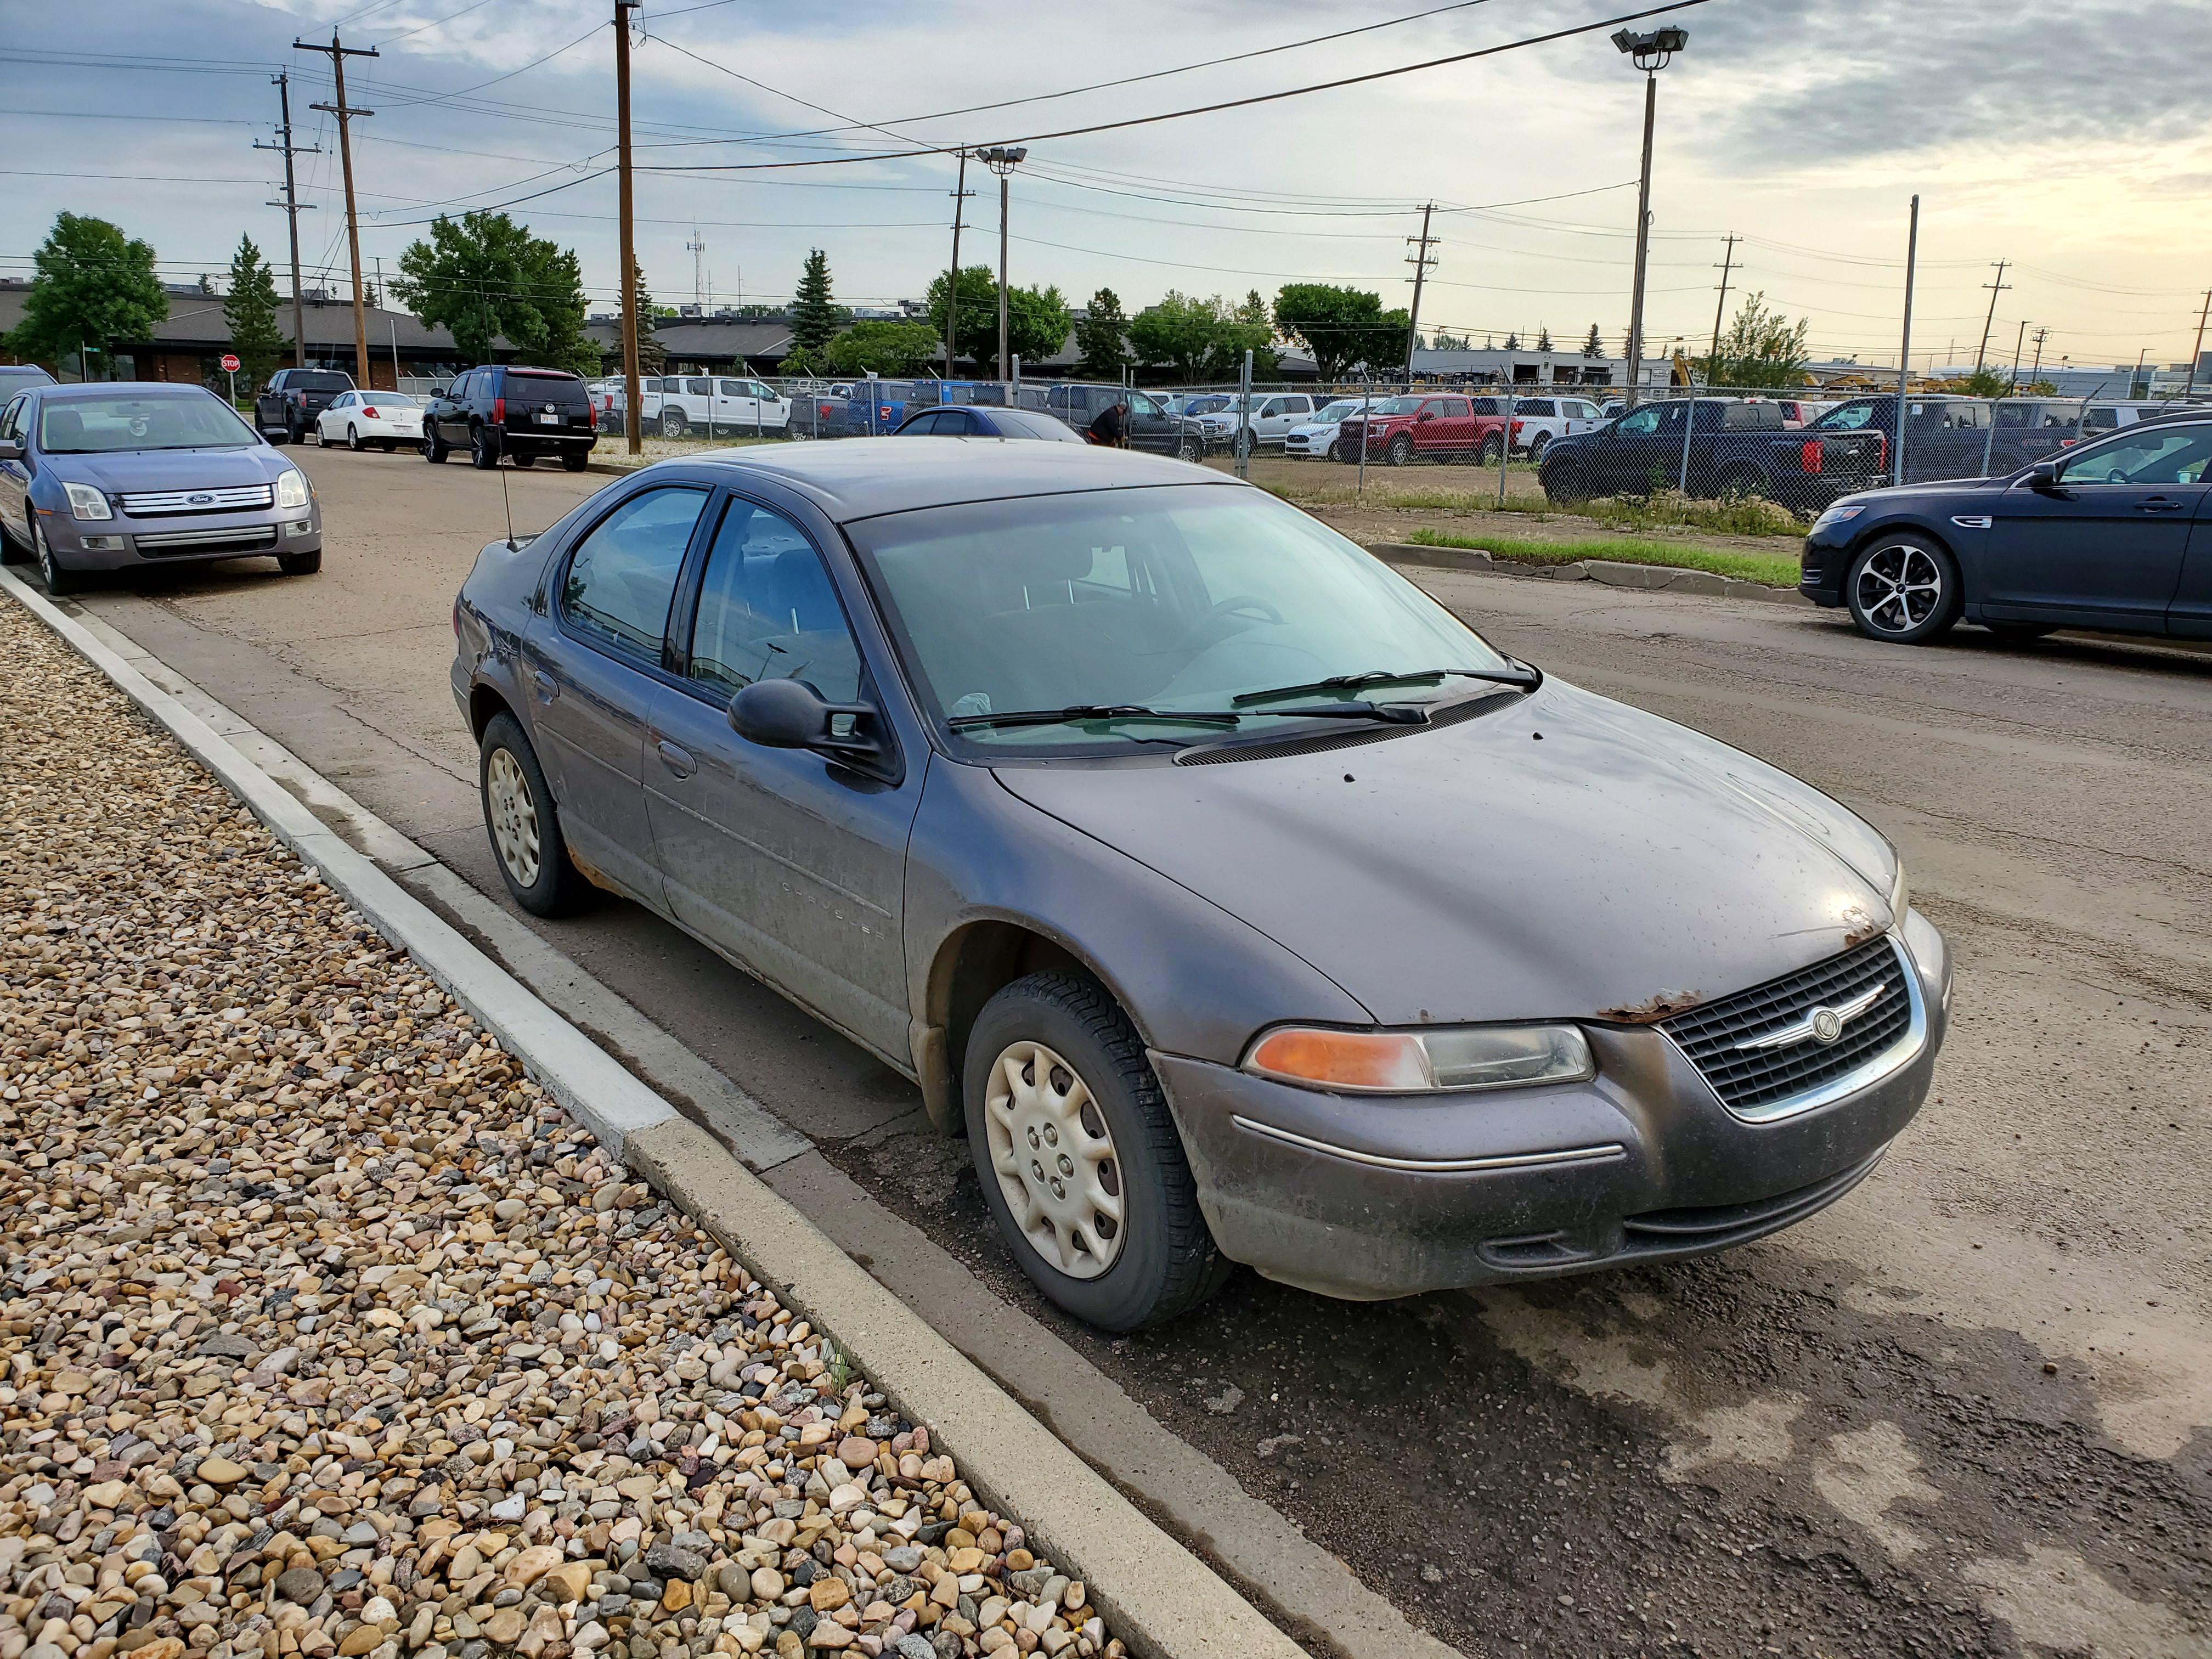 2000 Chrysler Cirrus, it wants to die as bad as I do. Running on 3  cylinders, pissing oil, burning coolant. Let it burn : r/RoastMyCar